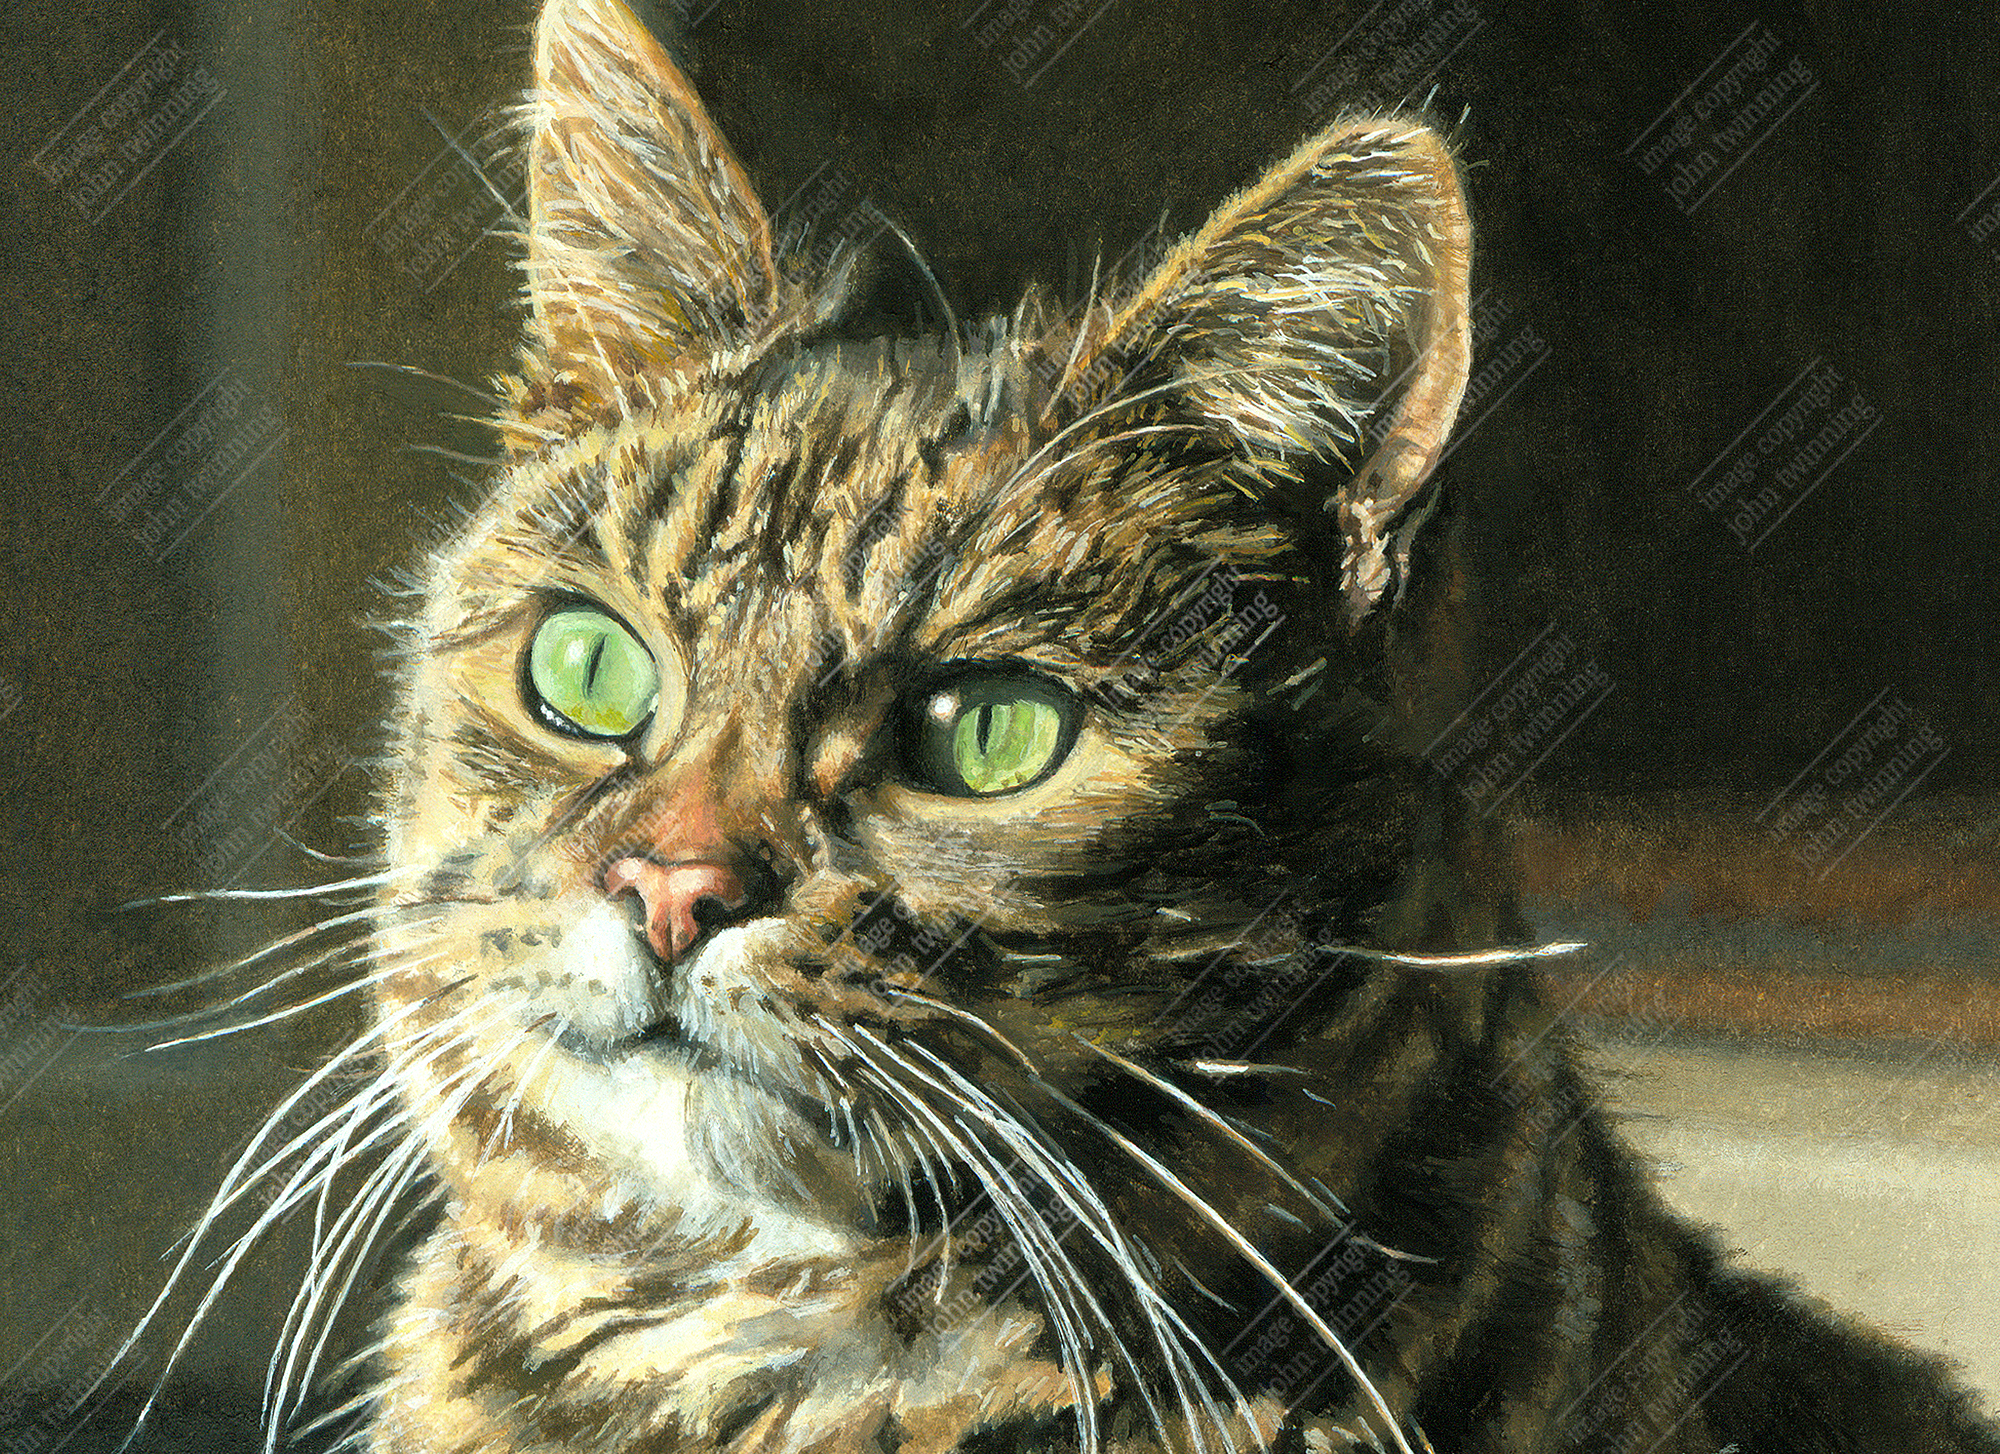 ‘Tabatha Study III’ [detail] – art print from a pet portrait watercolour painting of a tabby cat